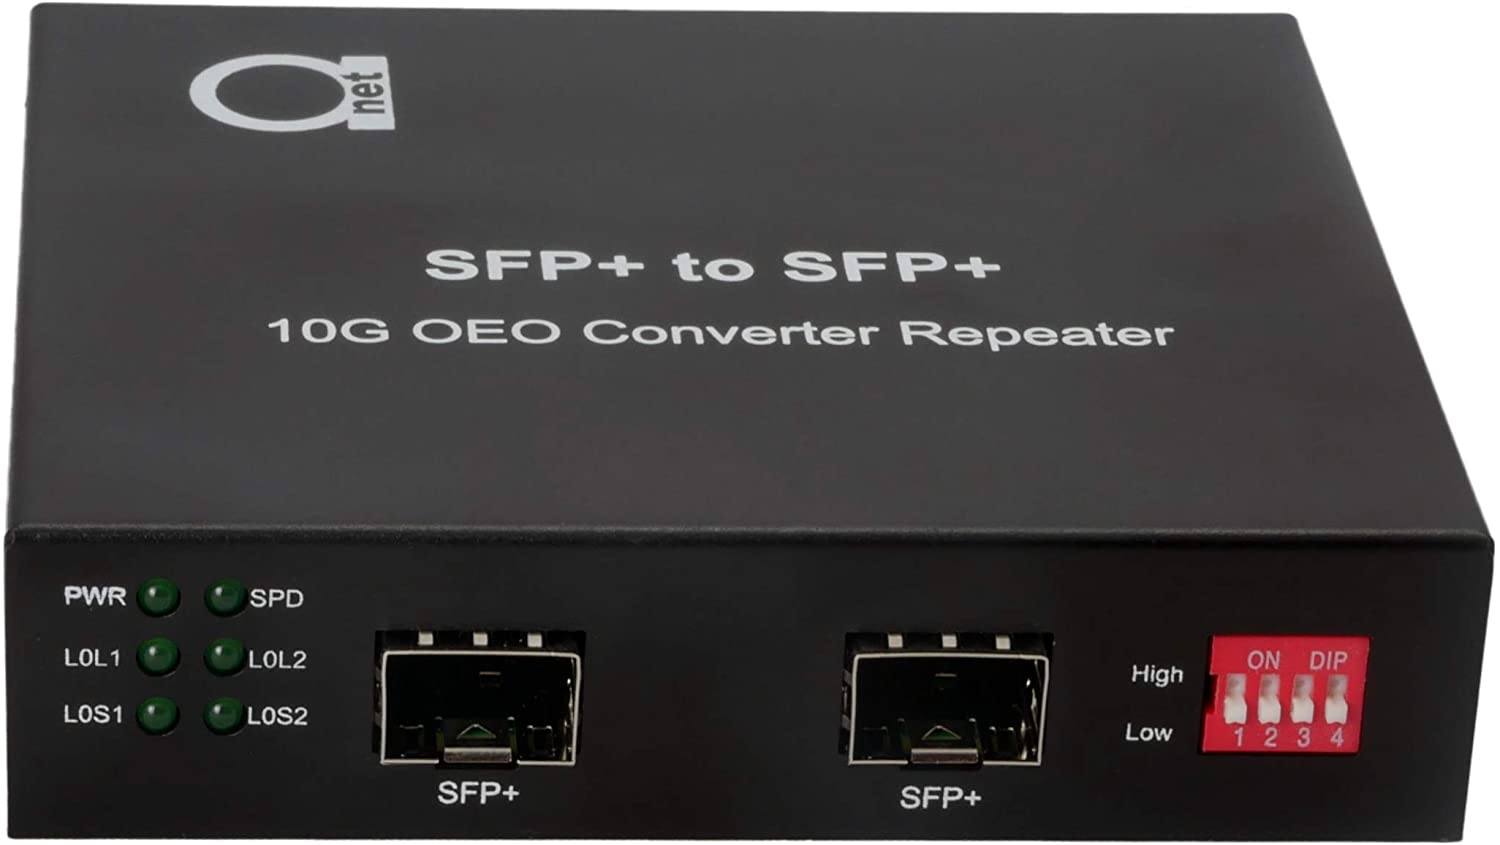 10G SFP+ to SFP+ Fiber to Fiber Media Converter - 10G OEO 3R Transparent  Repeater - 2 x Standard Open SFP+ Slots - Universal - Supports 10GB SFP+ or  1GB SFP Fiber Modules - Without Transceivers